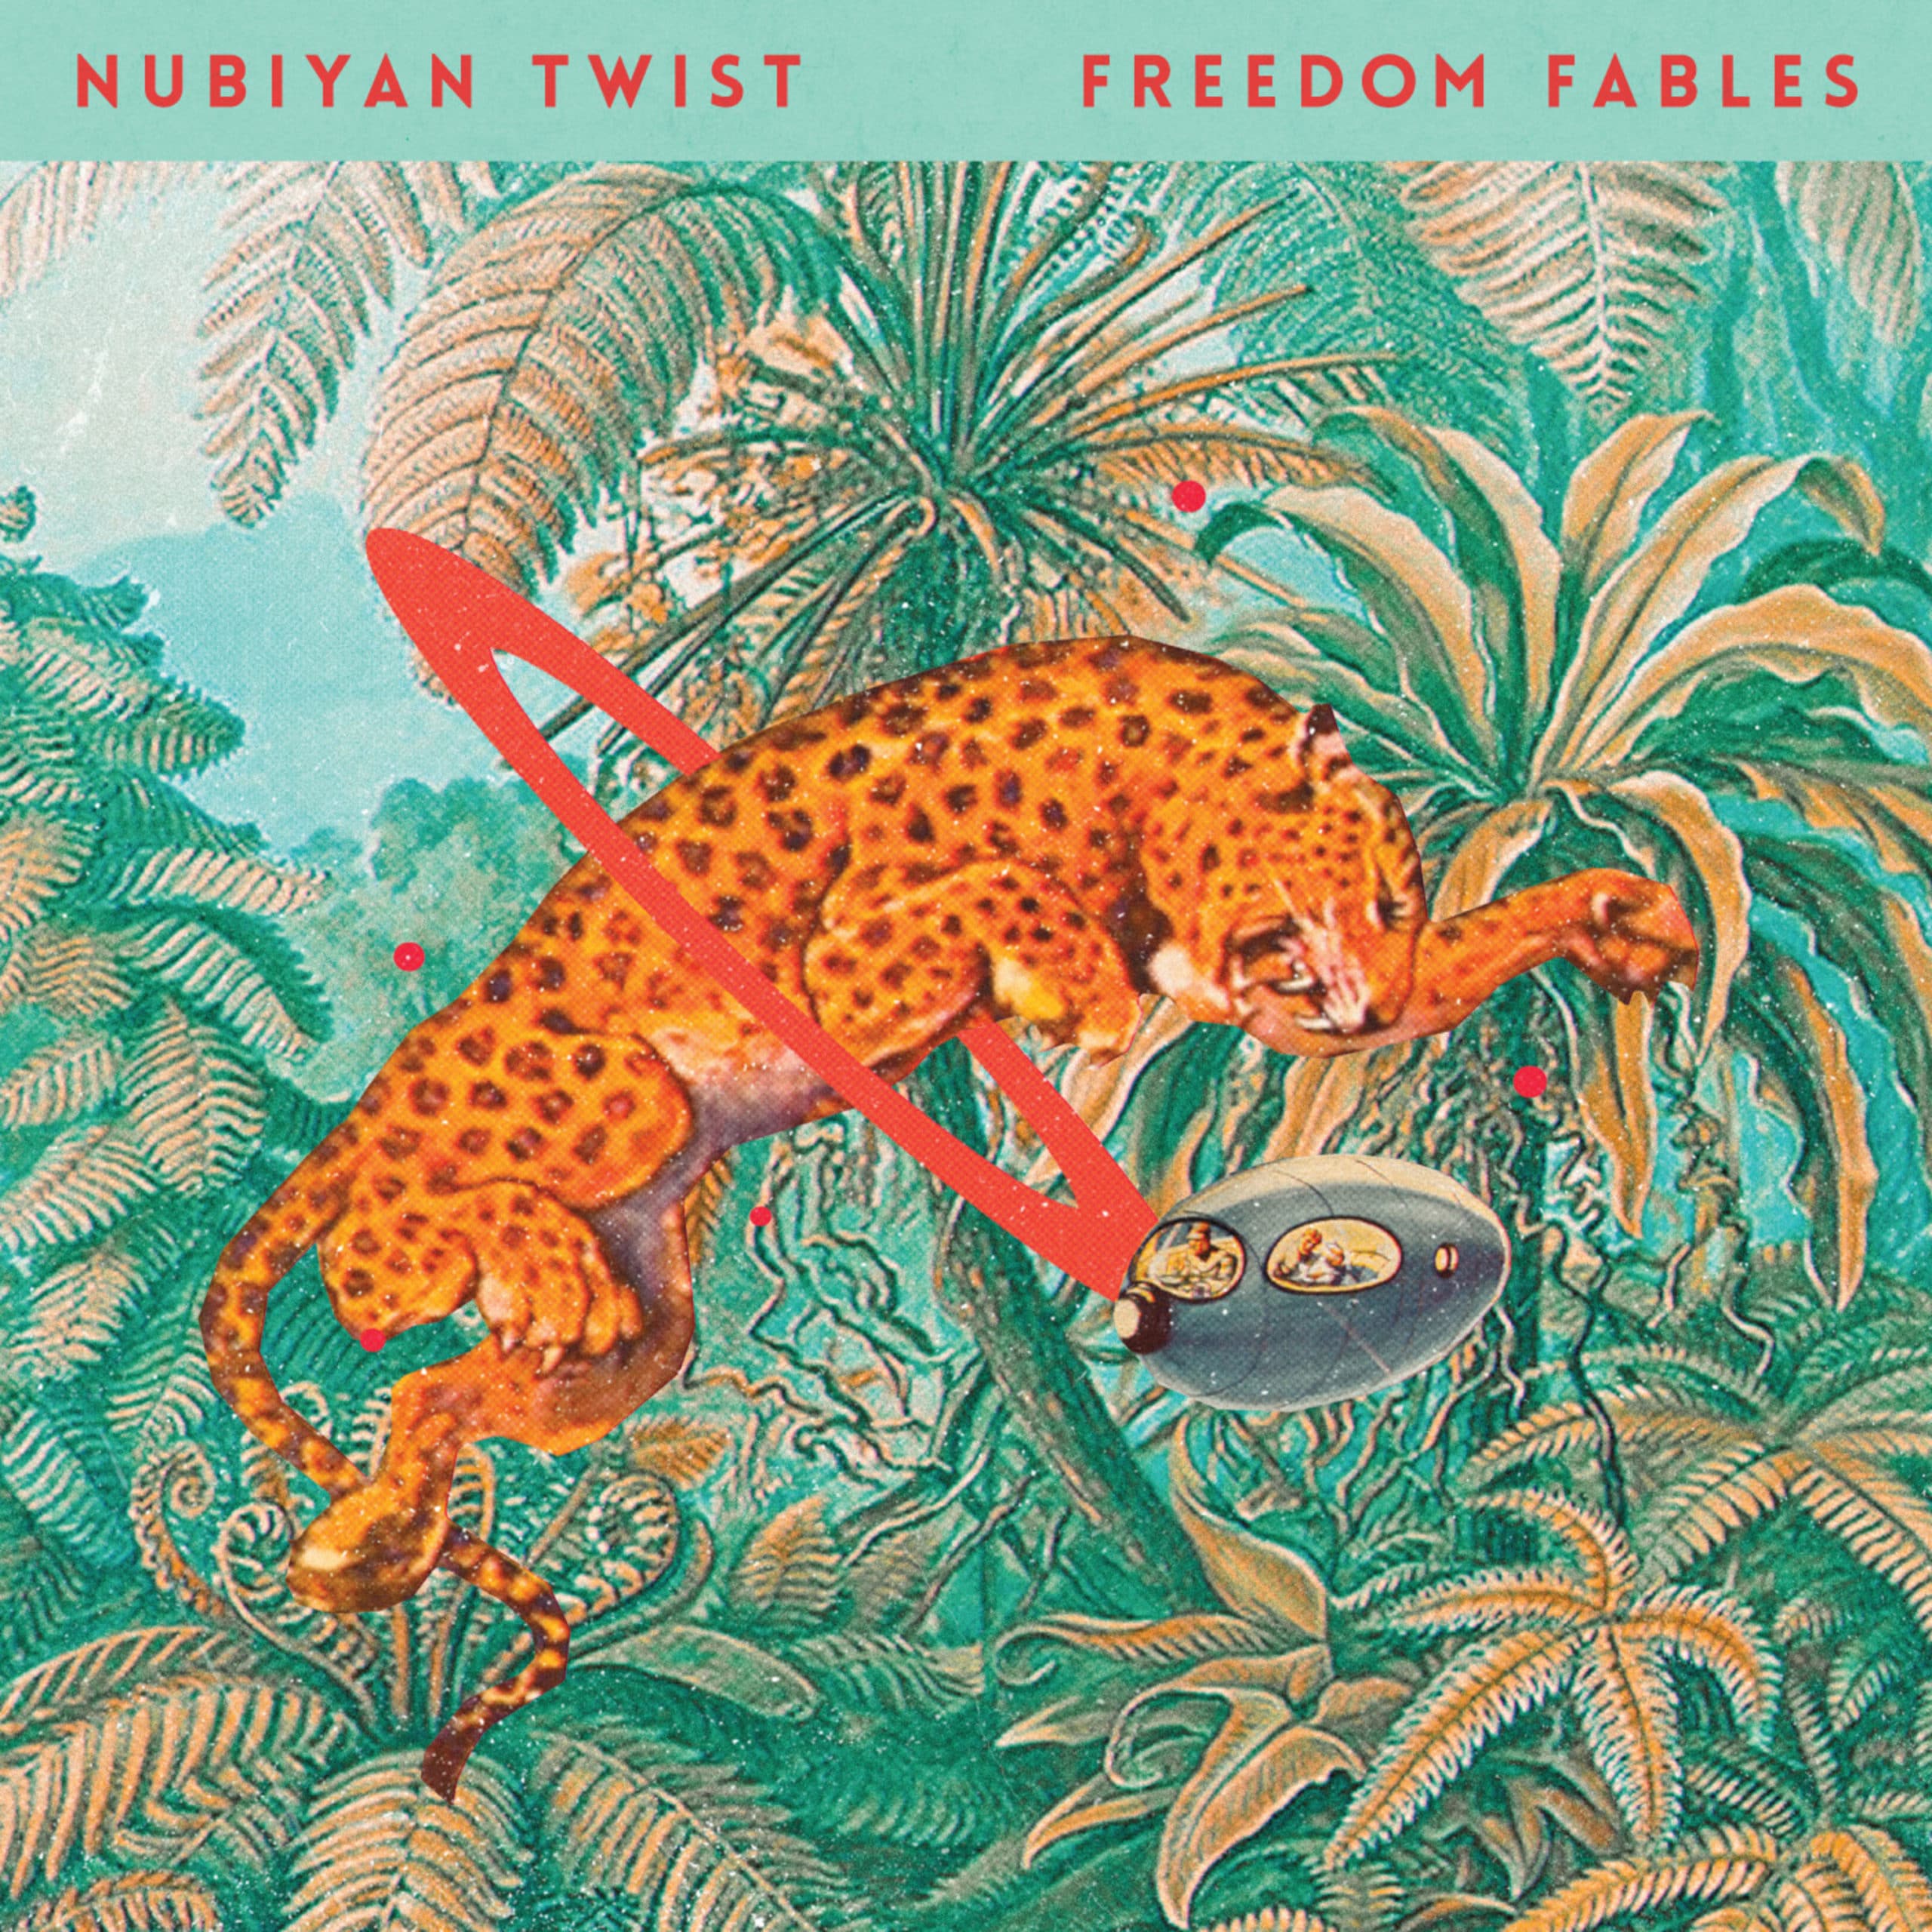 A Leopard jumping through the jungle, through a red ring created by a spaceship. Nubiyan Twist - Freedom Fables